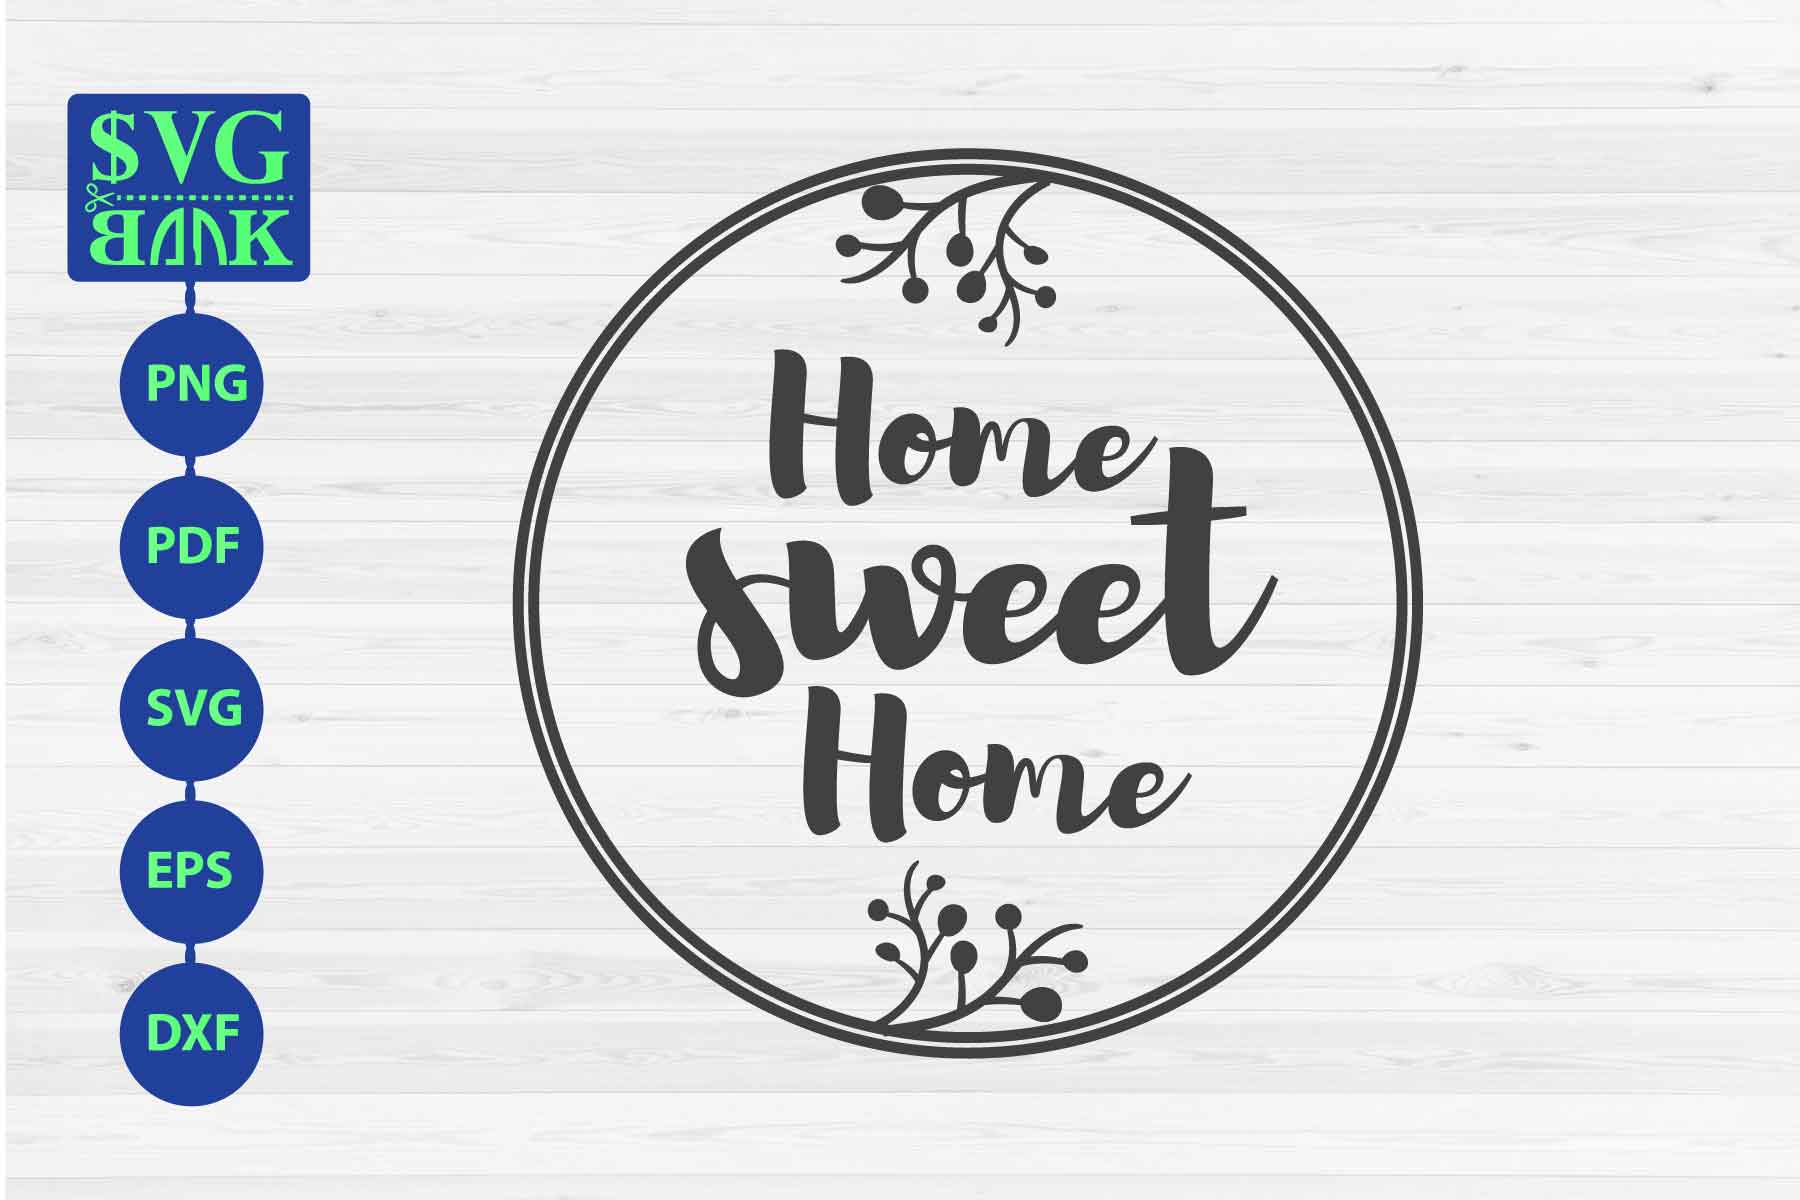 Download Home Sweet Home sign SVG in circle frame